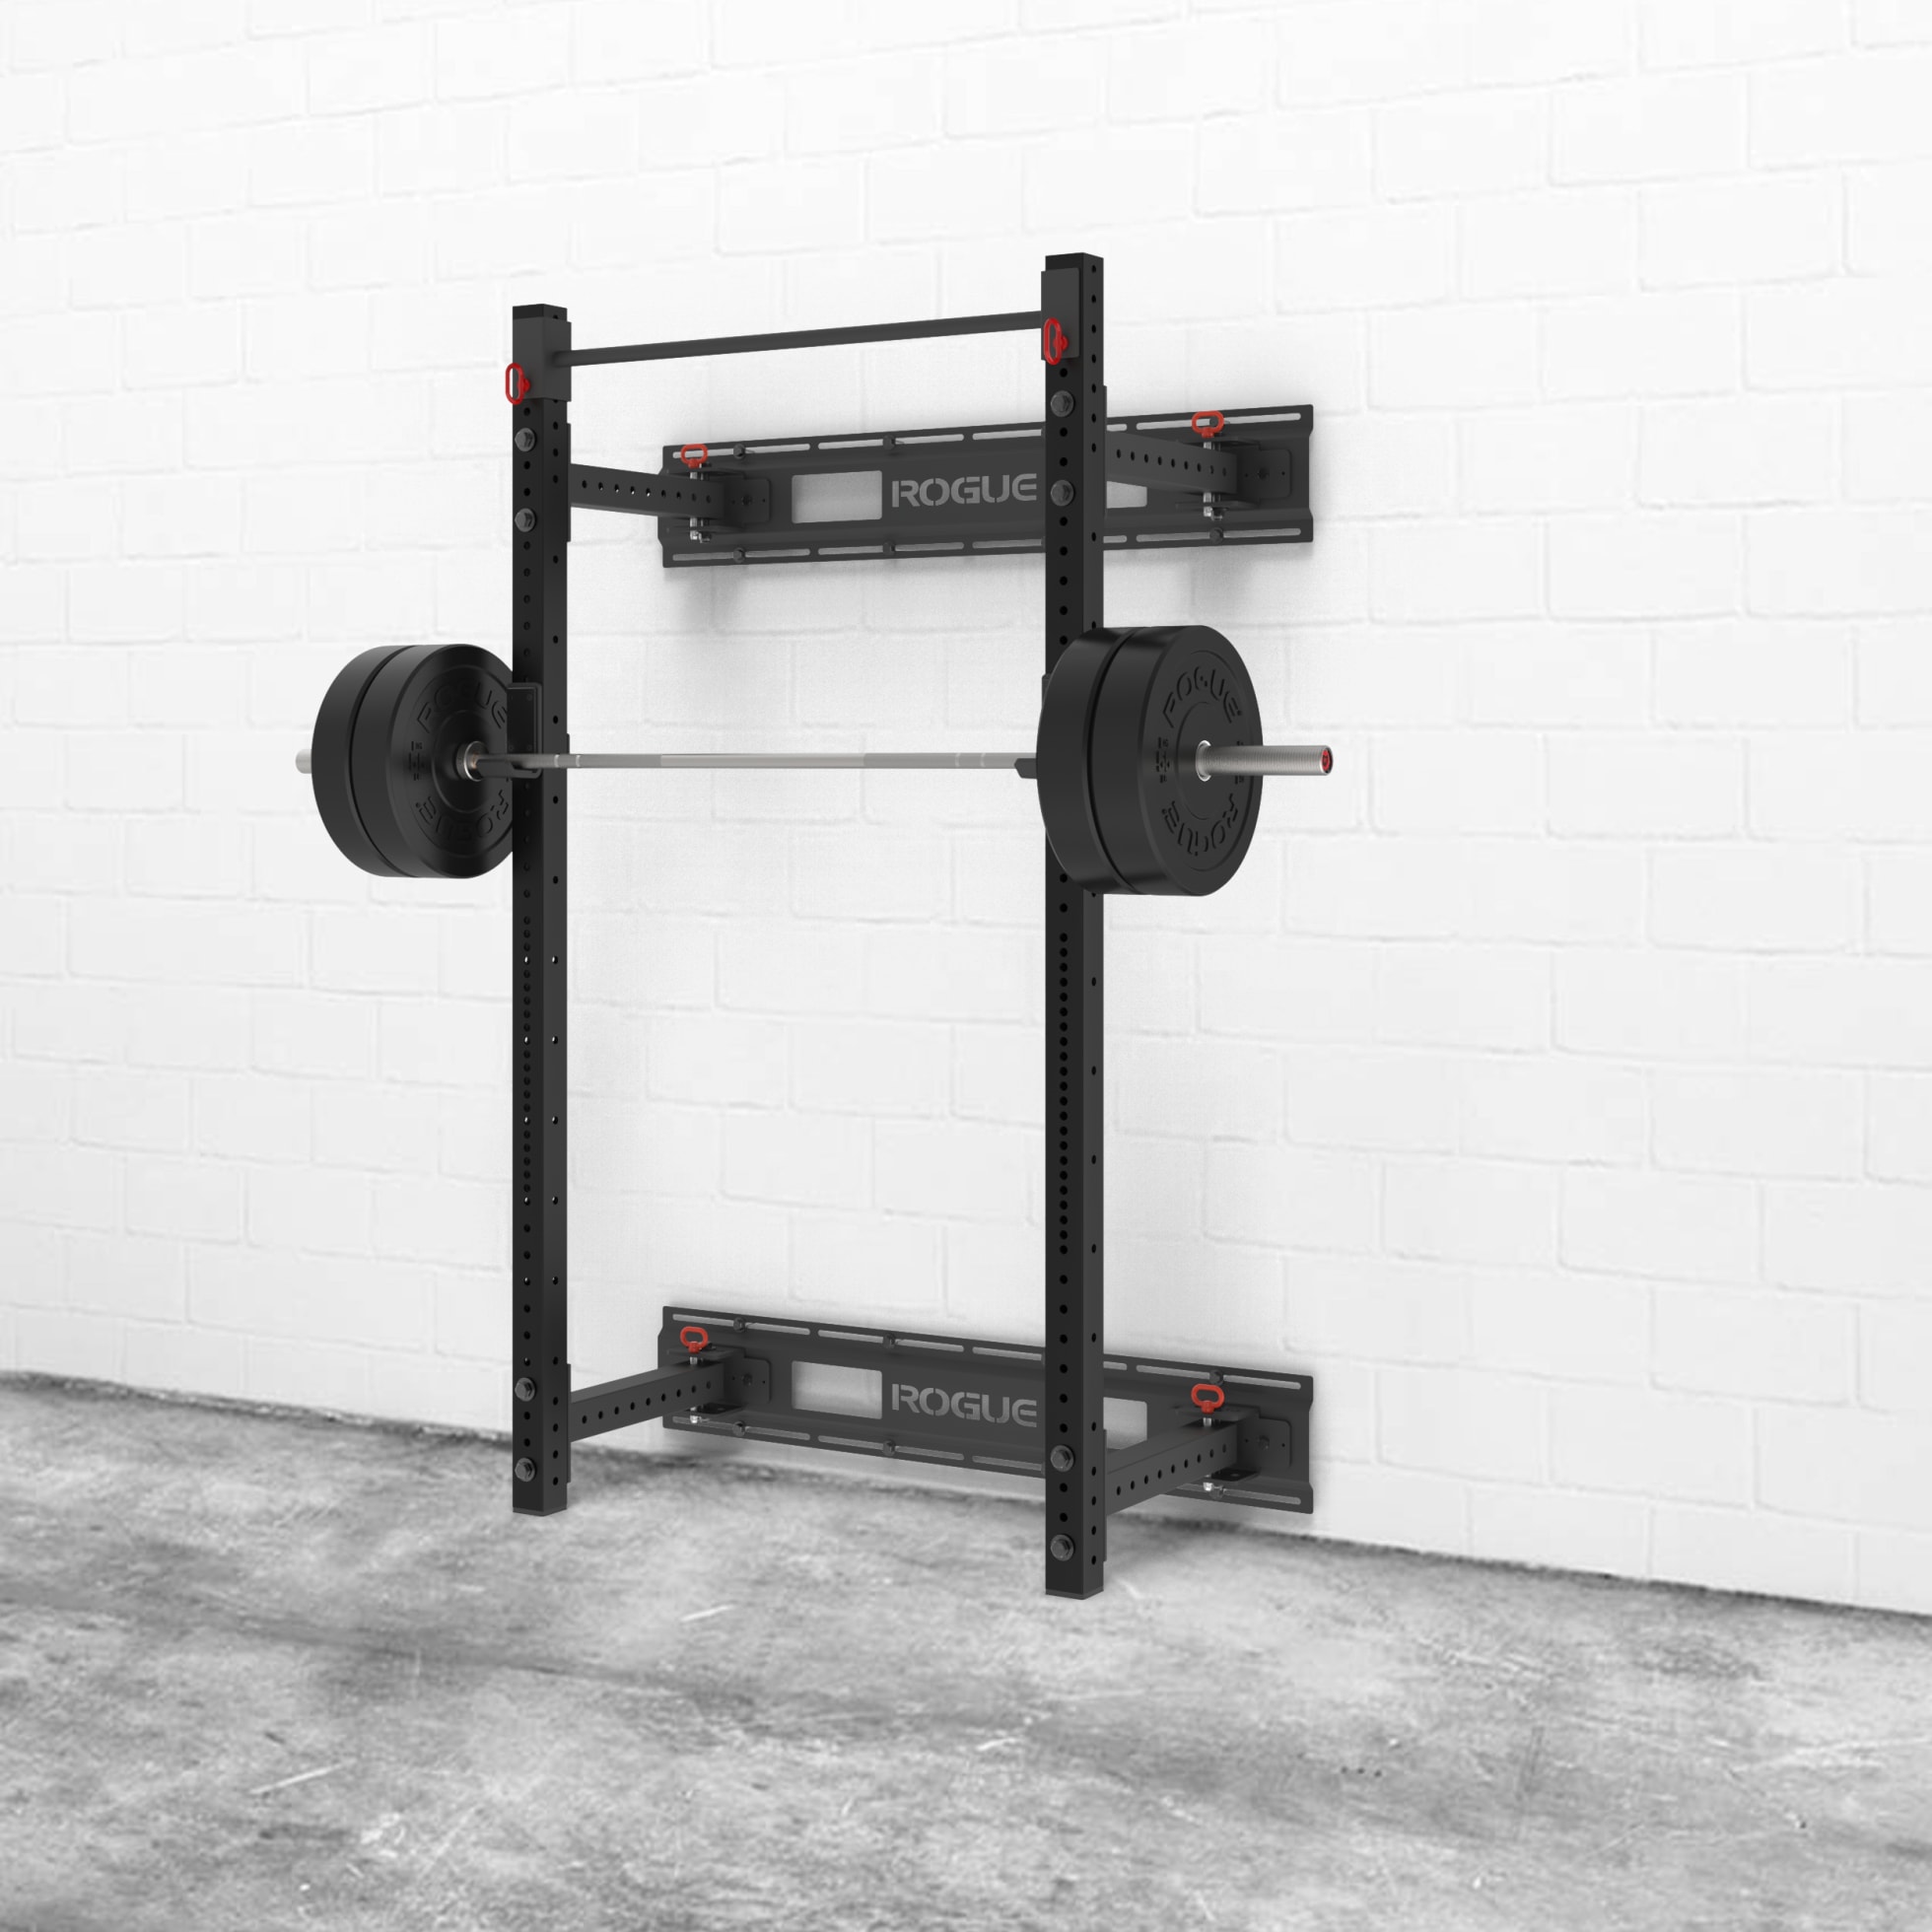 Best Rogue Rack For Home Gym 